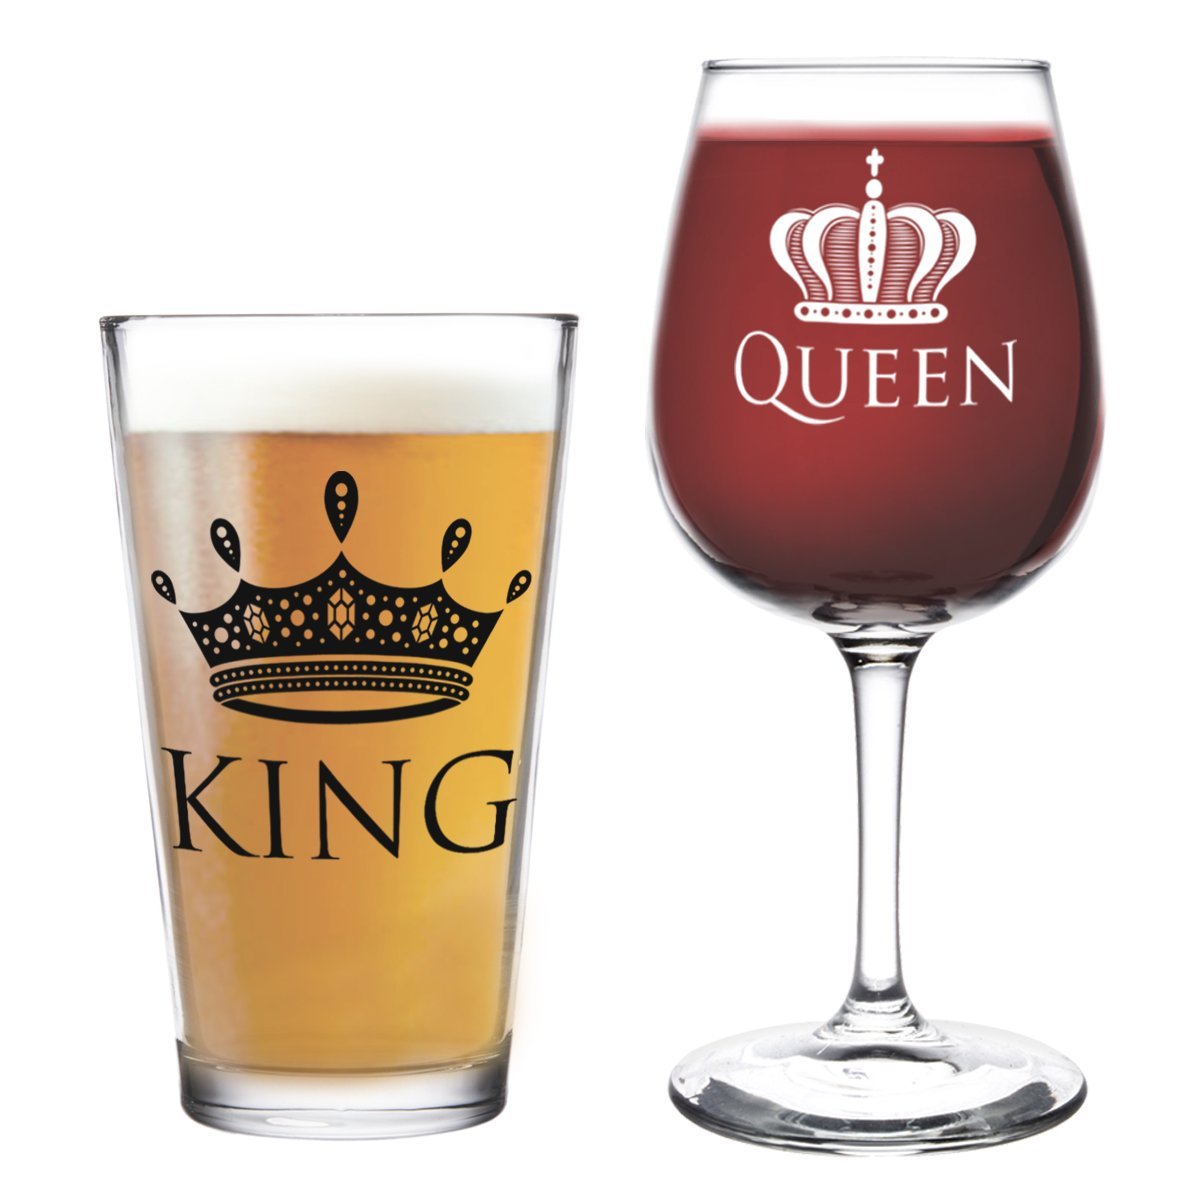 king and queen glasses